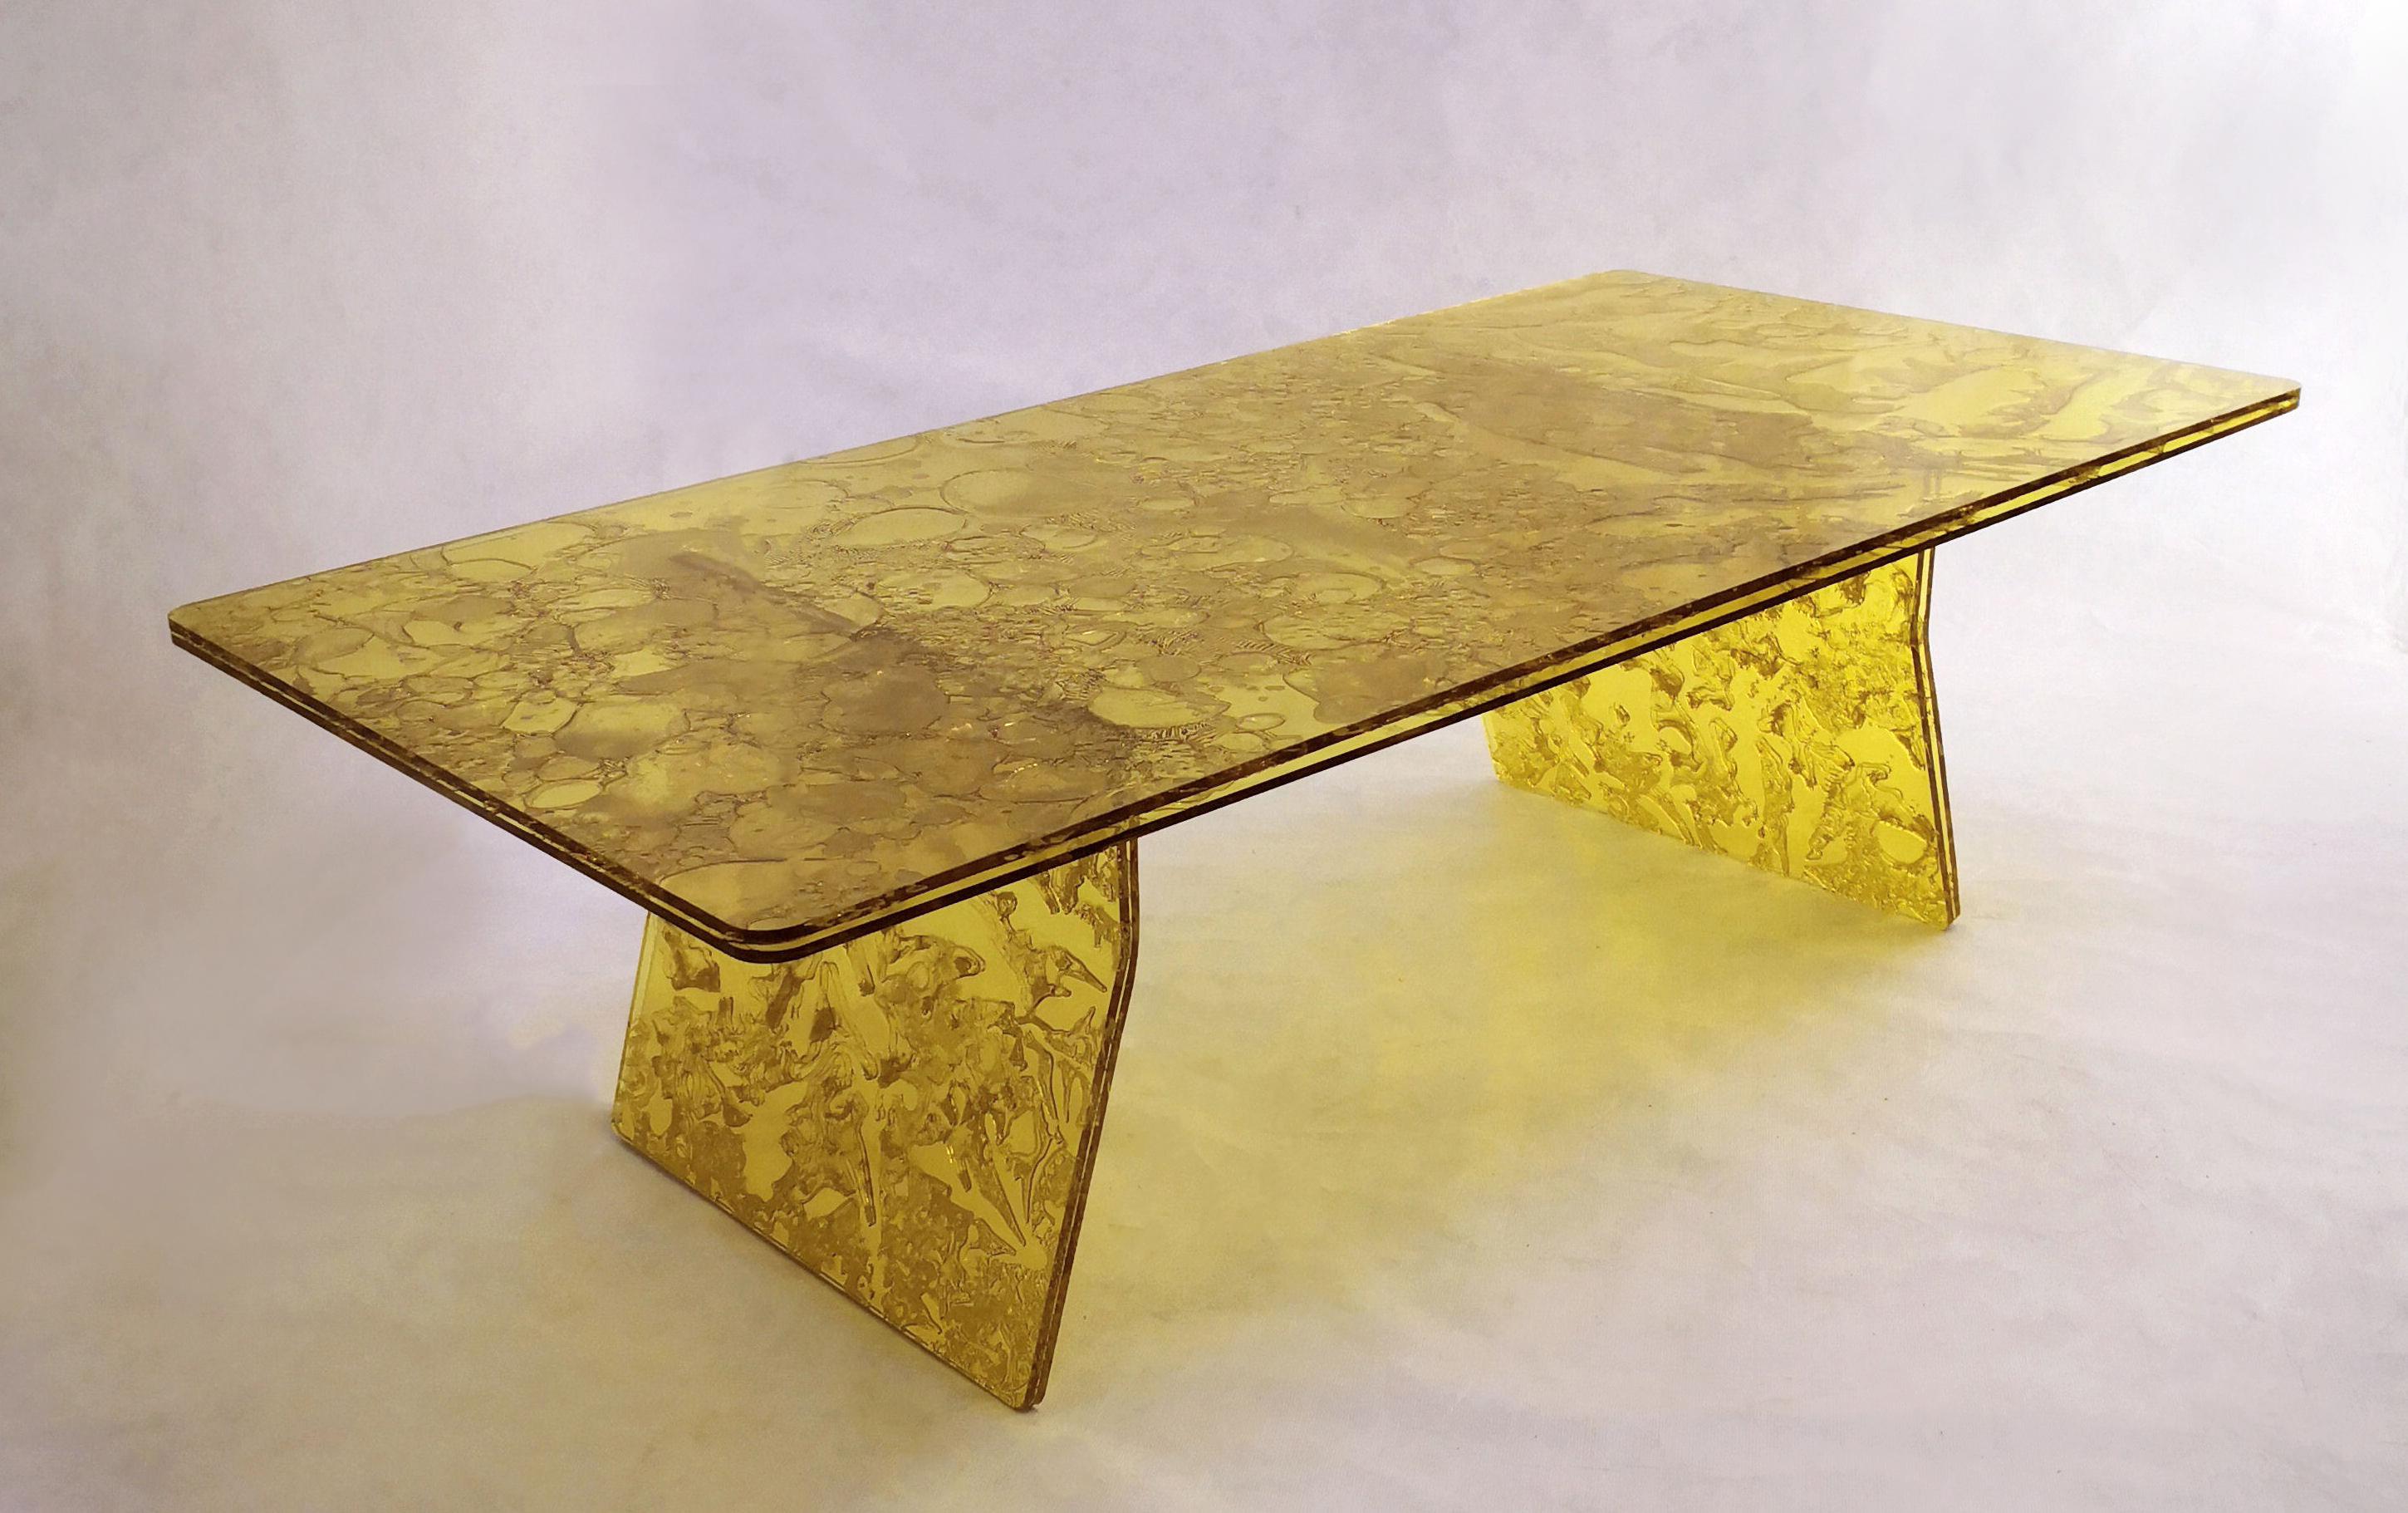 Modern Sketch Coffee Table Made in Acrylic Yellow Design Roberto Giacomucci in 2022 For Sale